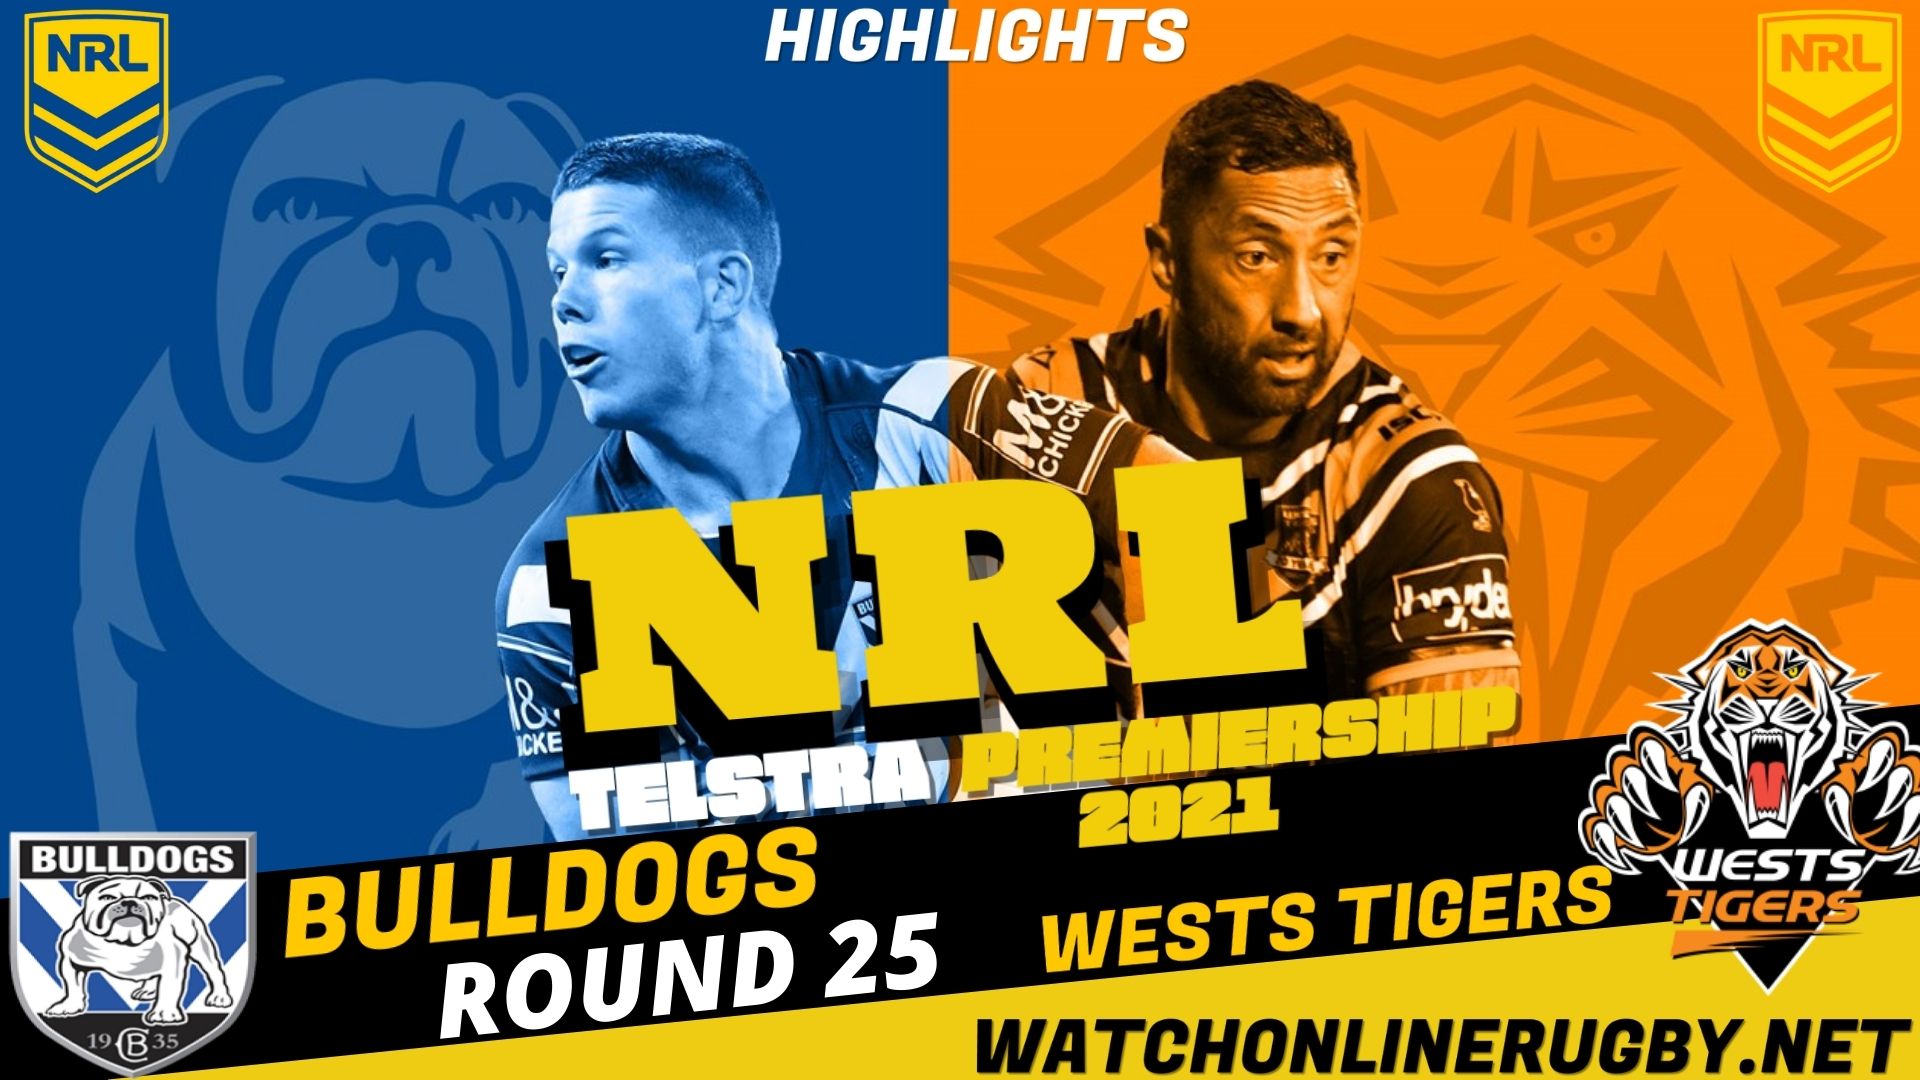 Wests Tigers Vs Bulldogs Highlights RD 25 NRL Rugby